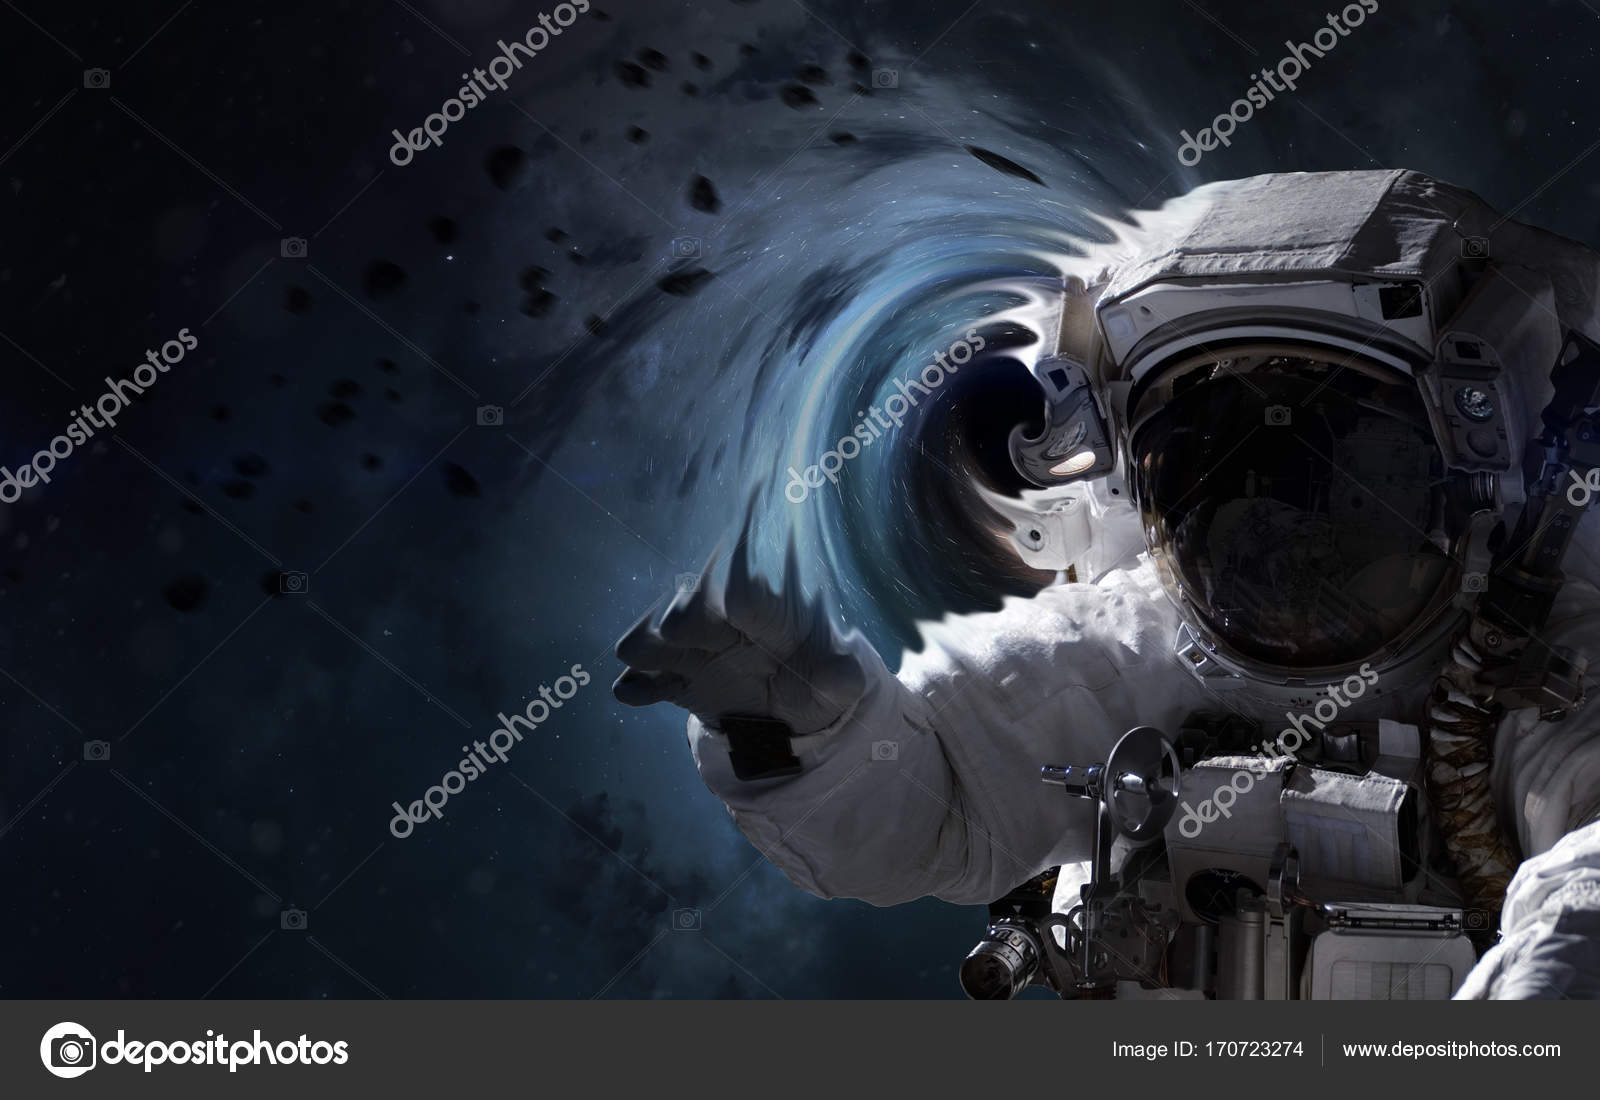 Black Hole And Astronaut - Astronaut , HD Wallpaper & Backgrounds